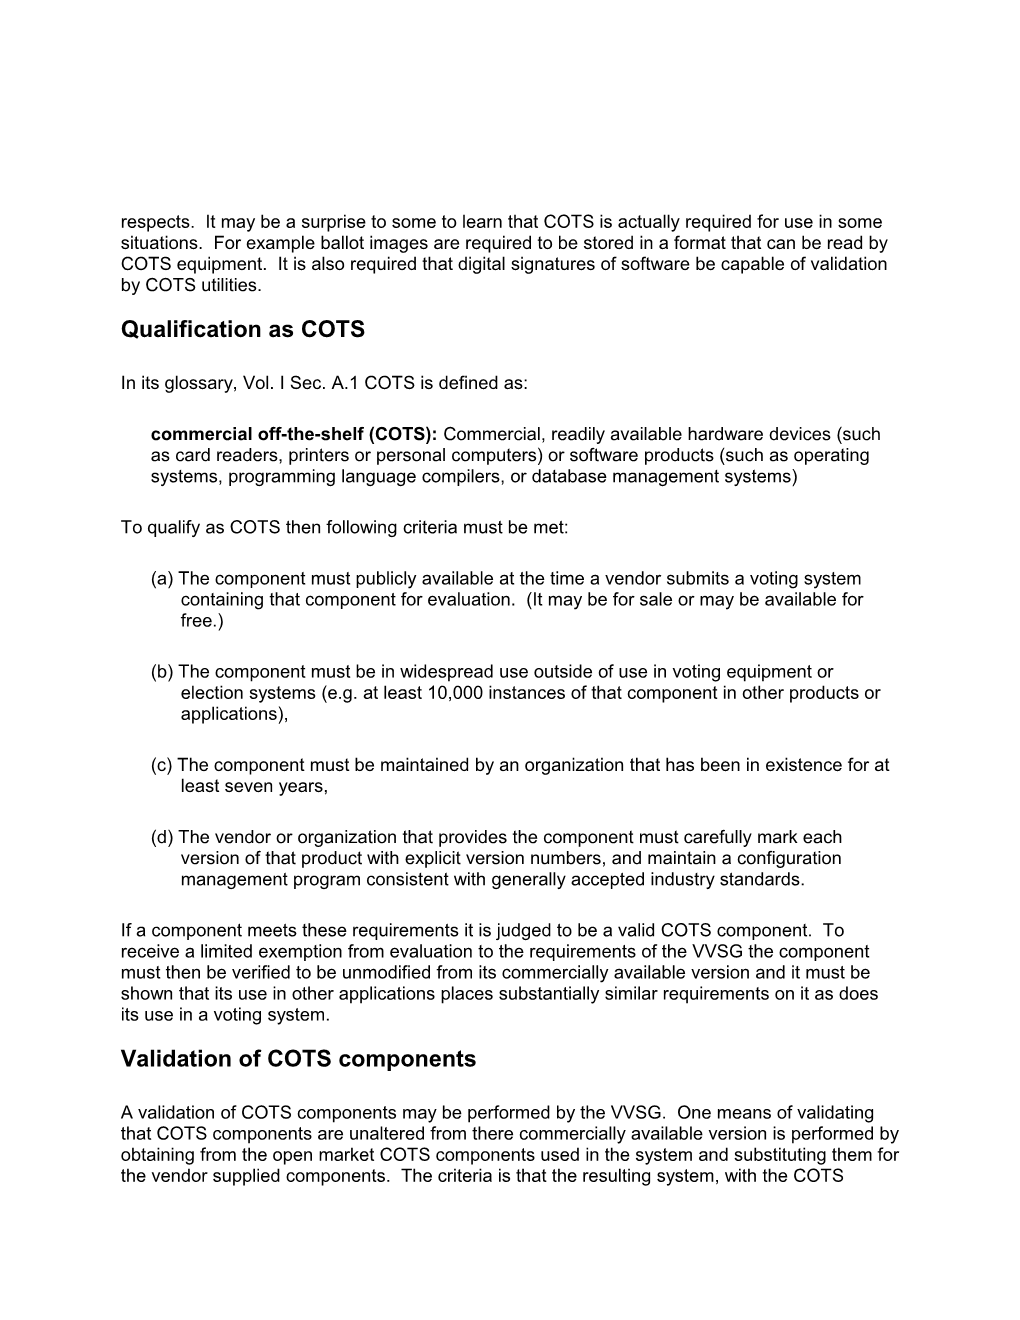 Supplemental Guidance on COTS